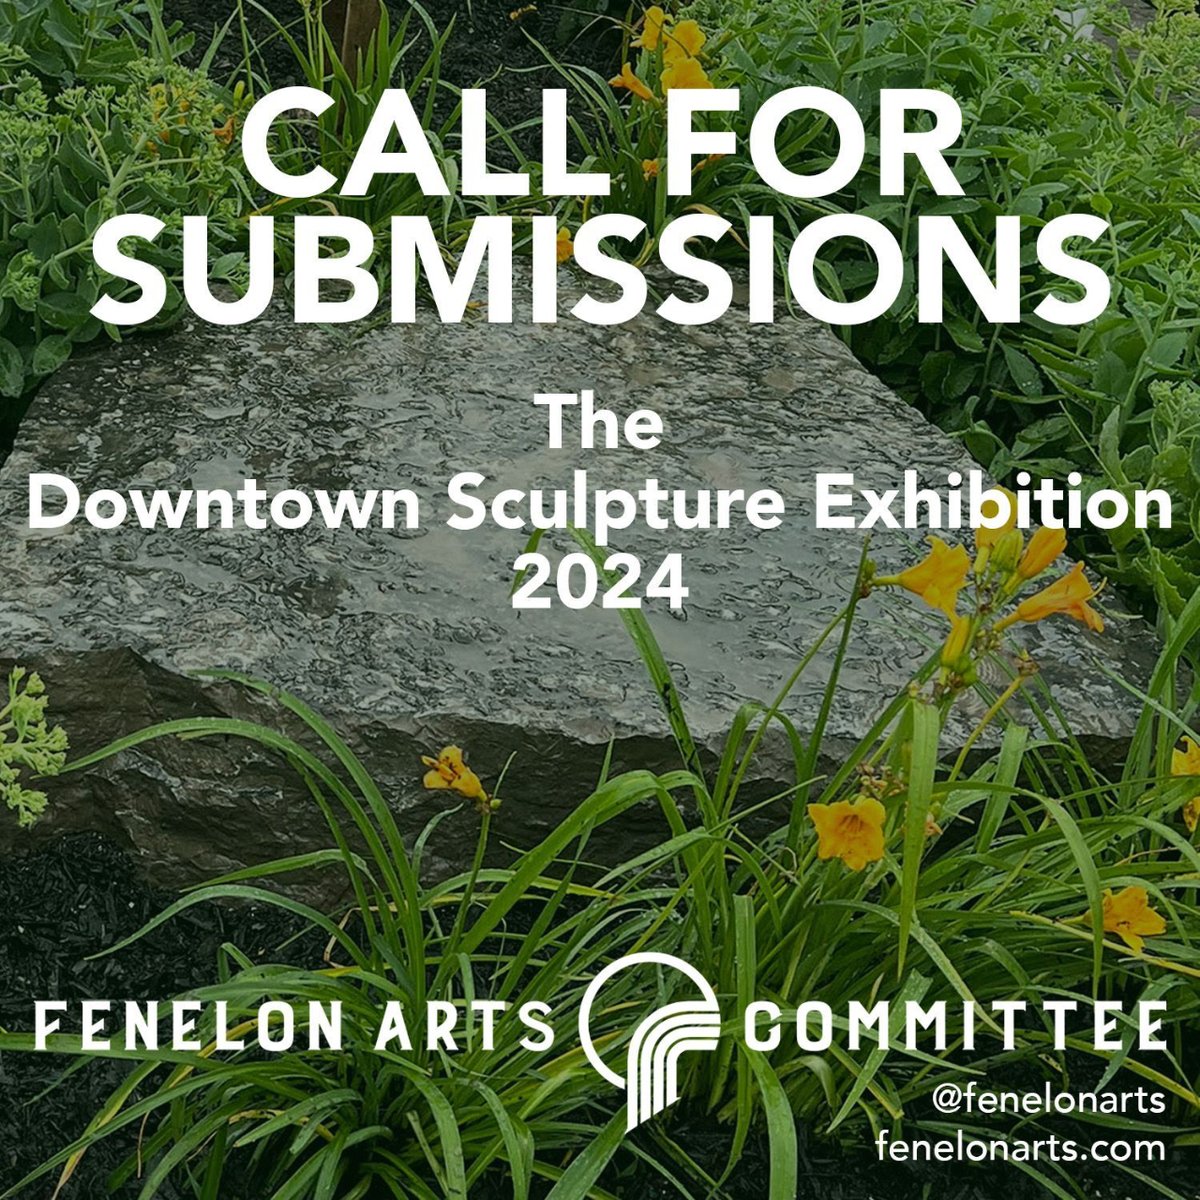 💥📢 CALL FOR SUBMISSIONS!
The Downtown Sculpture Exhibition 2024 in Fenelon Falls. 
Visit the website for complete details: fenelonarts.com